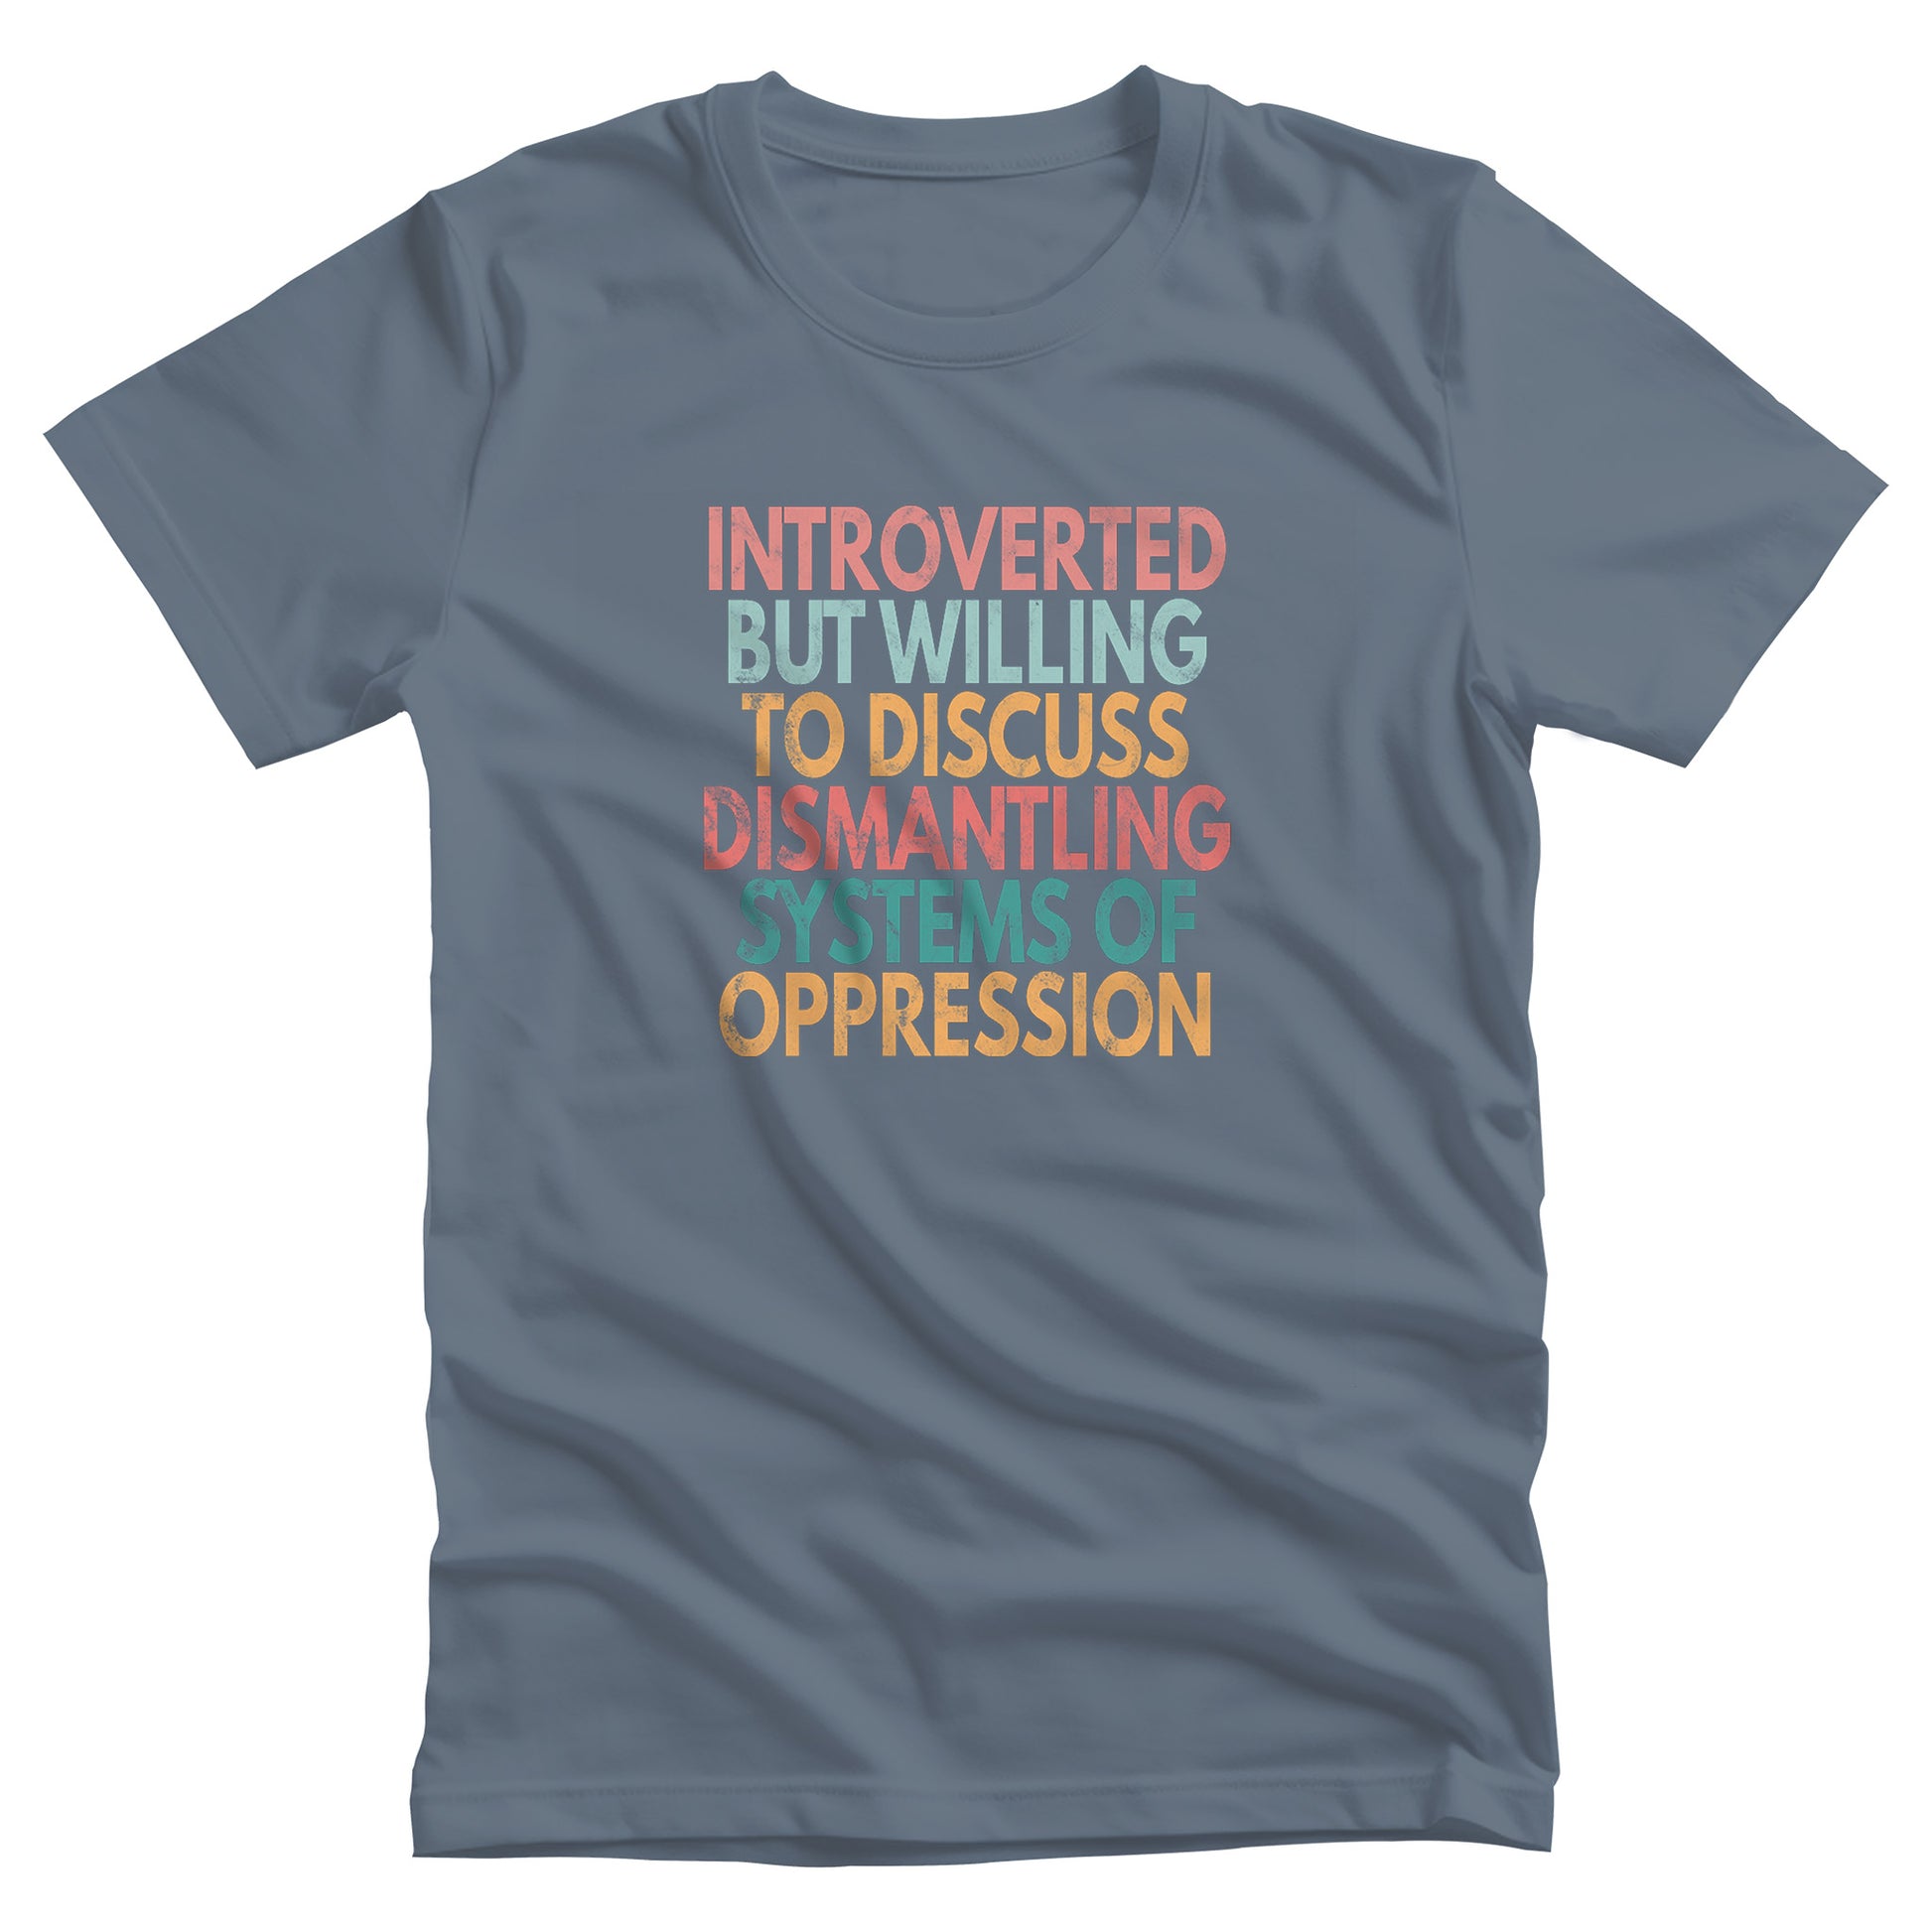 Steel Blue color unisex t-shirt that says, “Introverted But Willing to Discuss Dismantling Systems of Oppression” spread out in 6 rows with each row a different color. “Introverted” is red/dark pink, “But Willing” is blue-green, “To Discuss” is yellow/orange, “Dismantling” is red/dark pink, “Systems of” is a dark blue-green, and “Oppression” is yellow/orange. The text has a slightly distressed look.